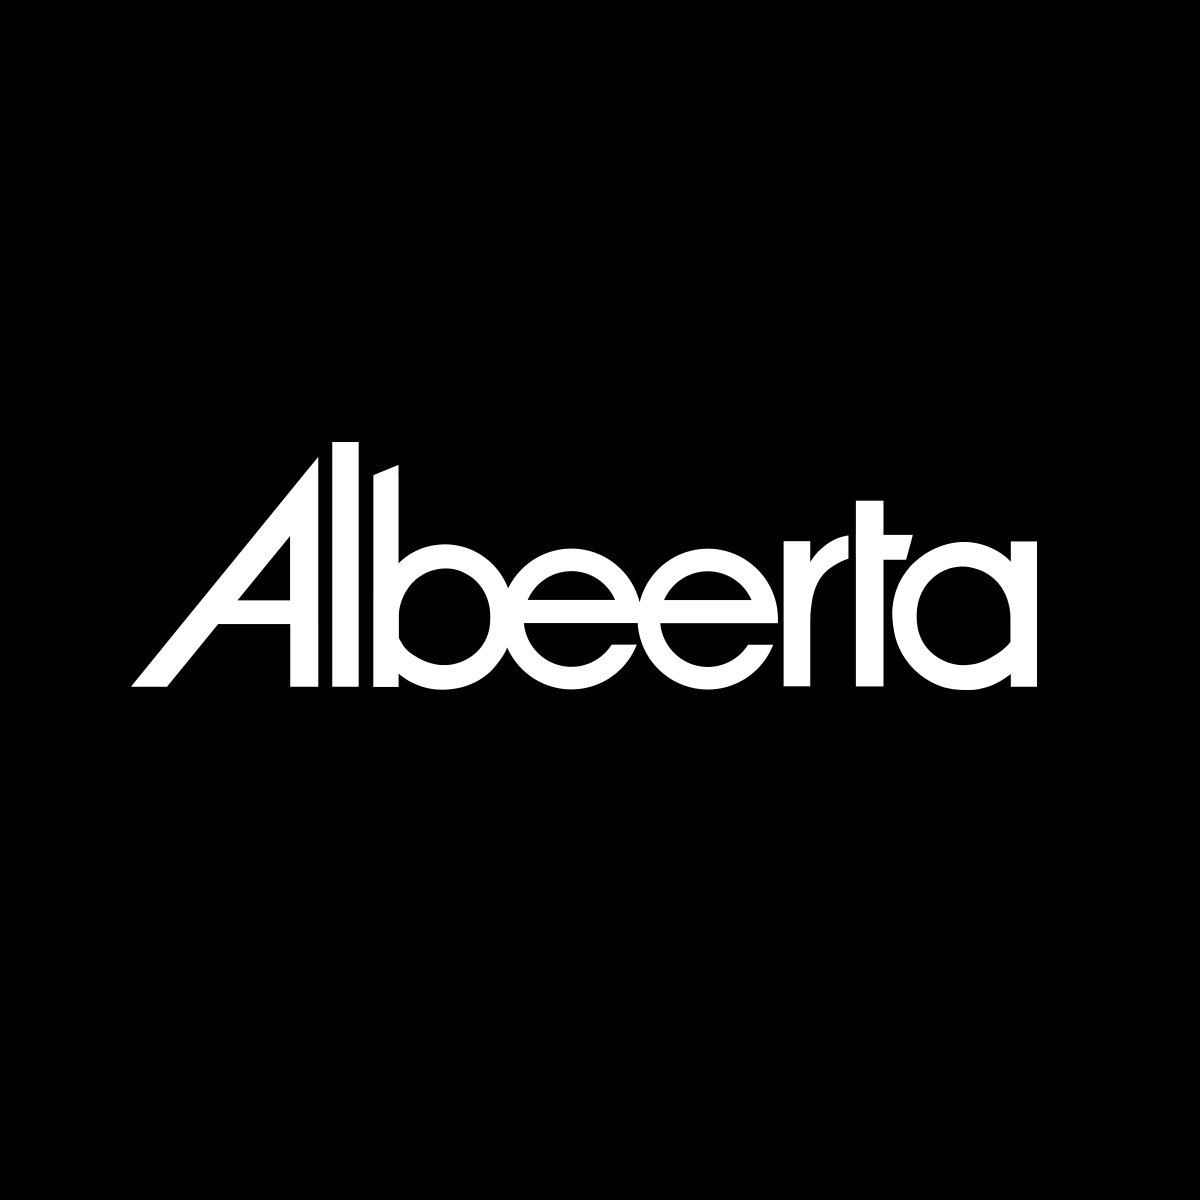 Alberta's craft beer agency and gathering point of all things #Albeerta.